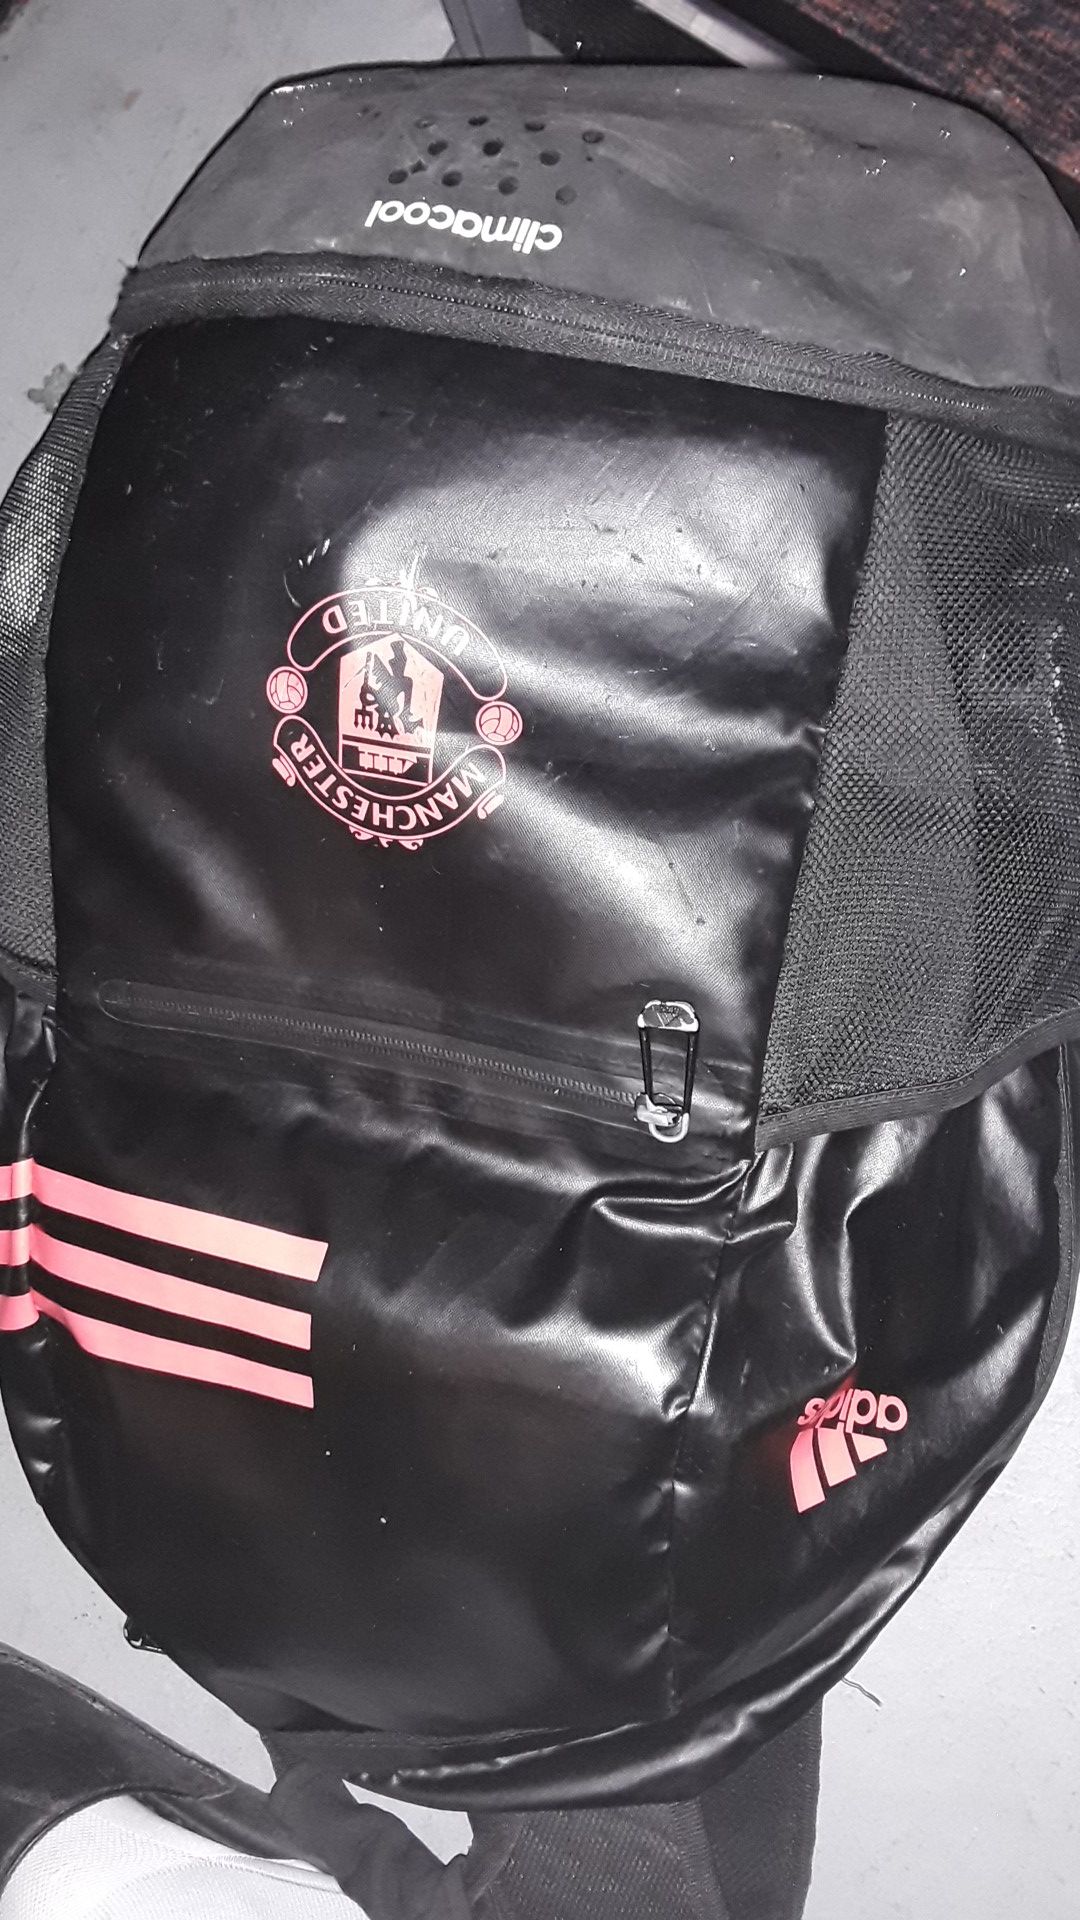 Manchester United Backpack can hold a soccer ball (limited)